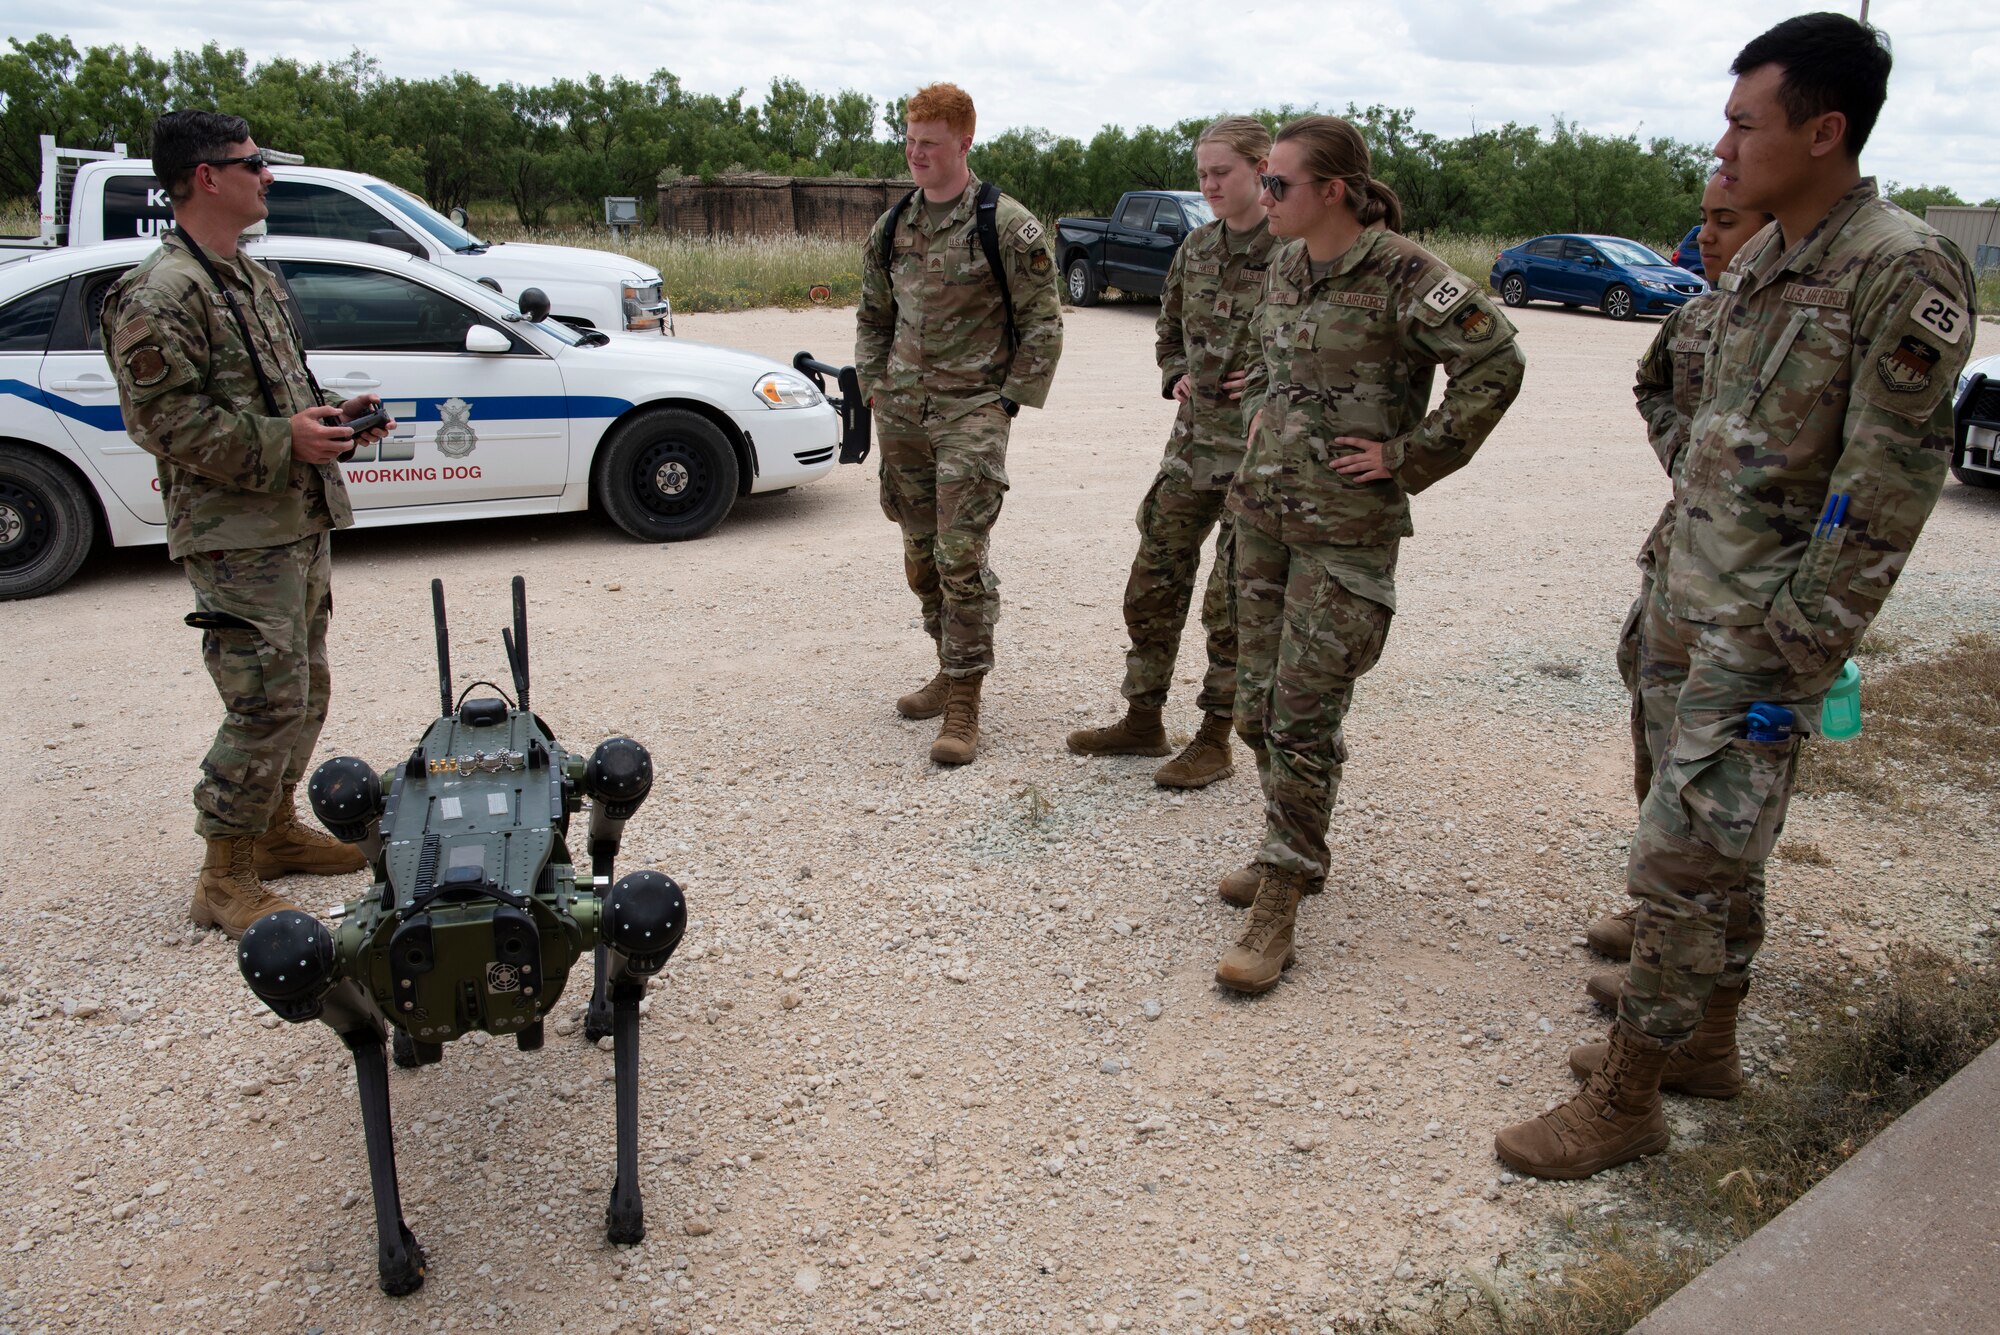 Airmen from the 7th Security Forces Squadron perform a robotic dog demonstration during an Air Force cadet tour at Dyess Air Force Base, Texas, June 30, 2023. Dyess hosted groups of Academy and Air Force ROTC cadets in a program that offered prospective officers the opportunity to learn about the base mission and career fields they may be interested in. The cadets toured 14 units around the base like security forces, logistics, medical, flightline operations and civil engineering. (U.S. Air Force photo by Airman 1st Class Alondra Cristobal Hernandez)